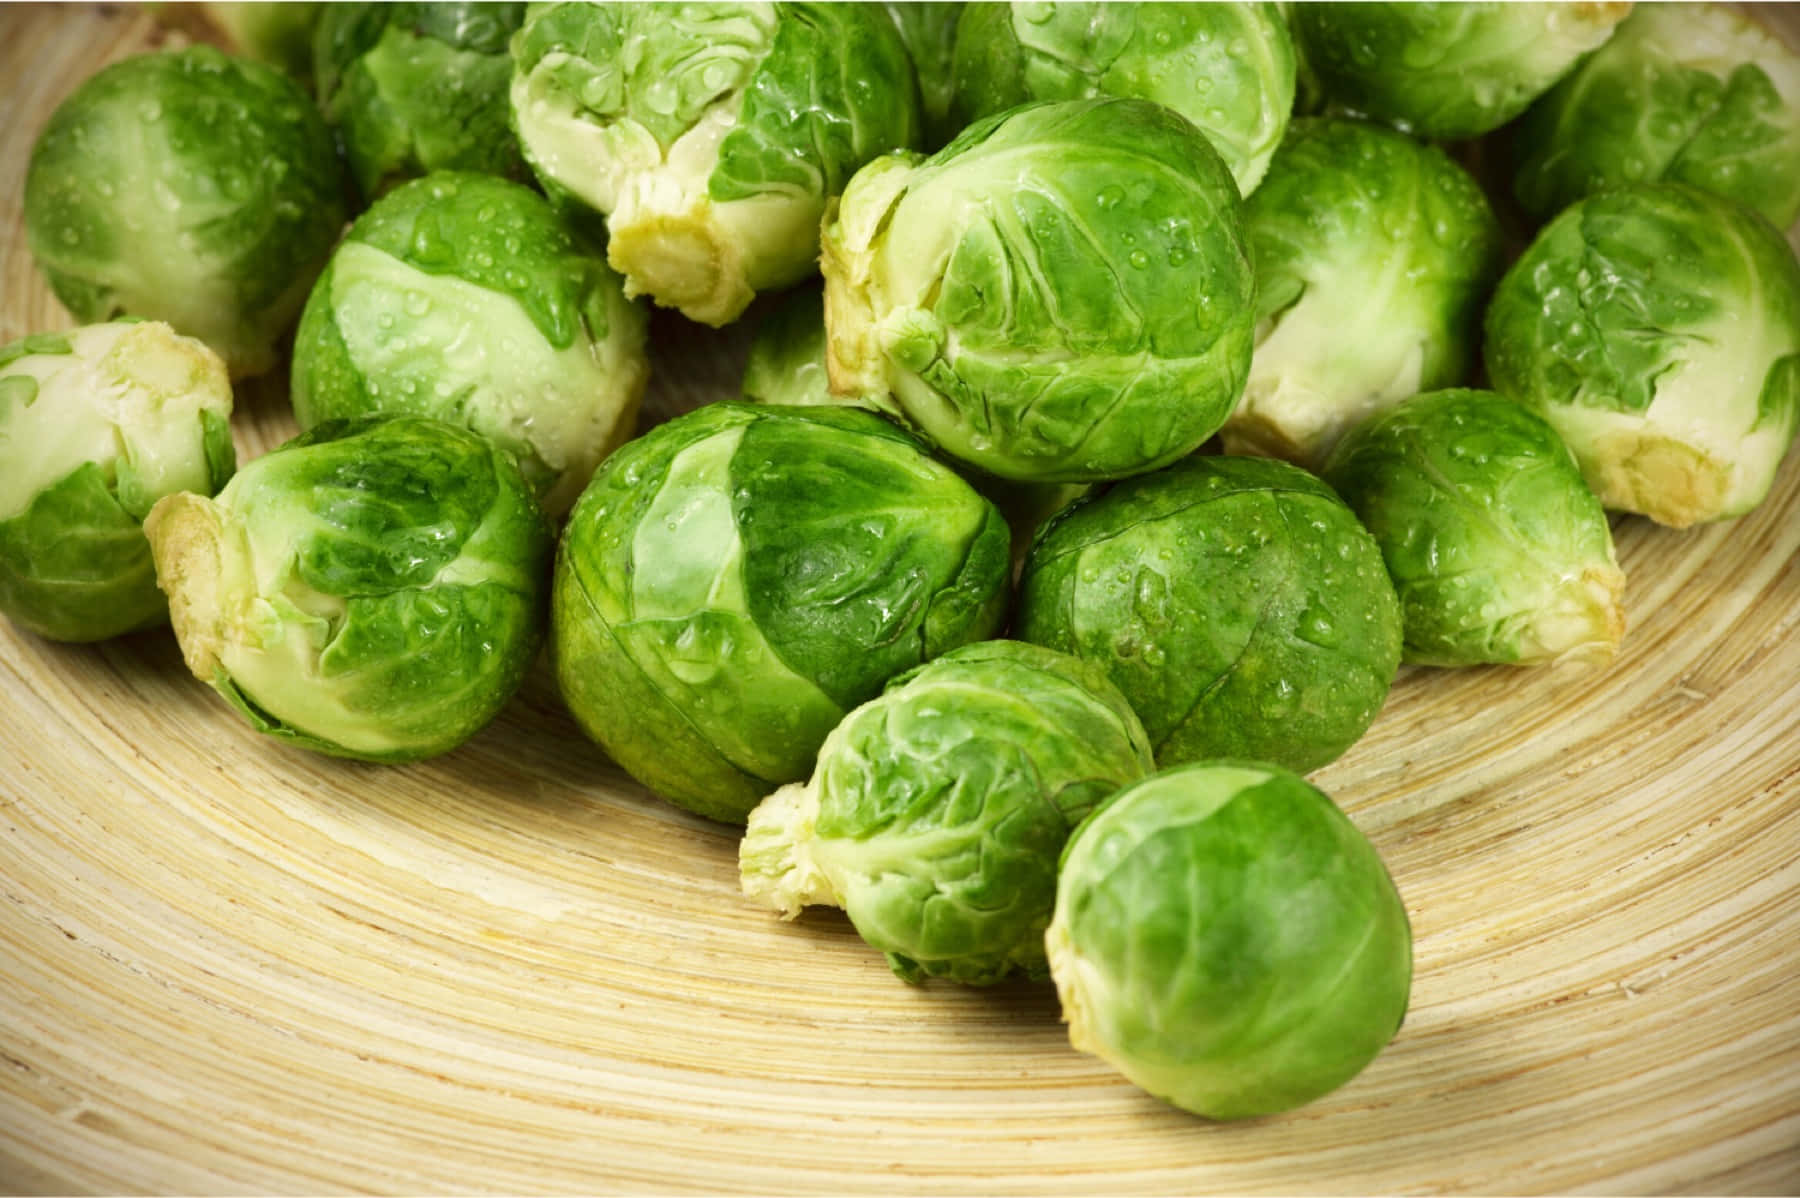 Brussel Sprouts On A Wooden Plate